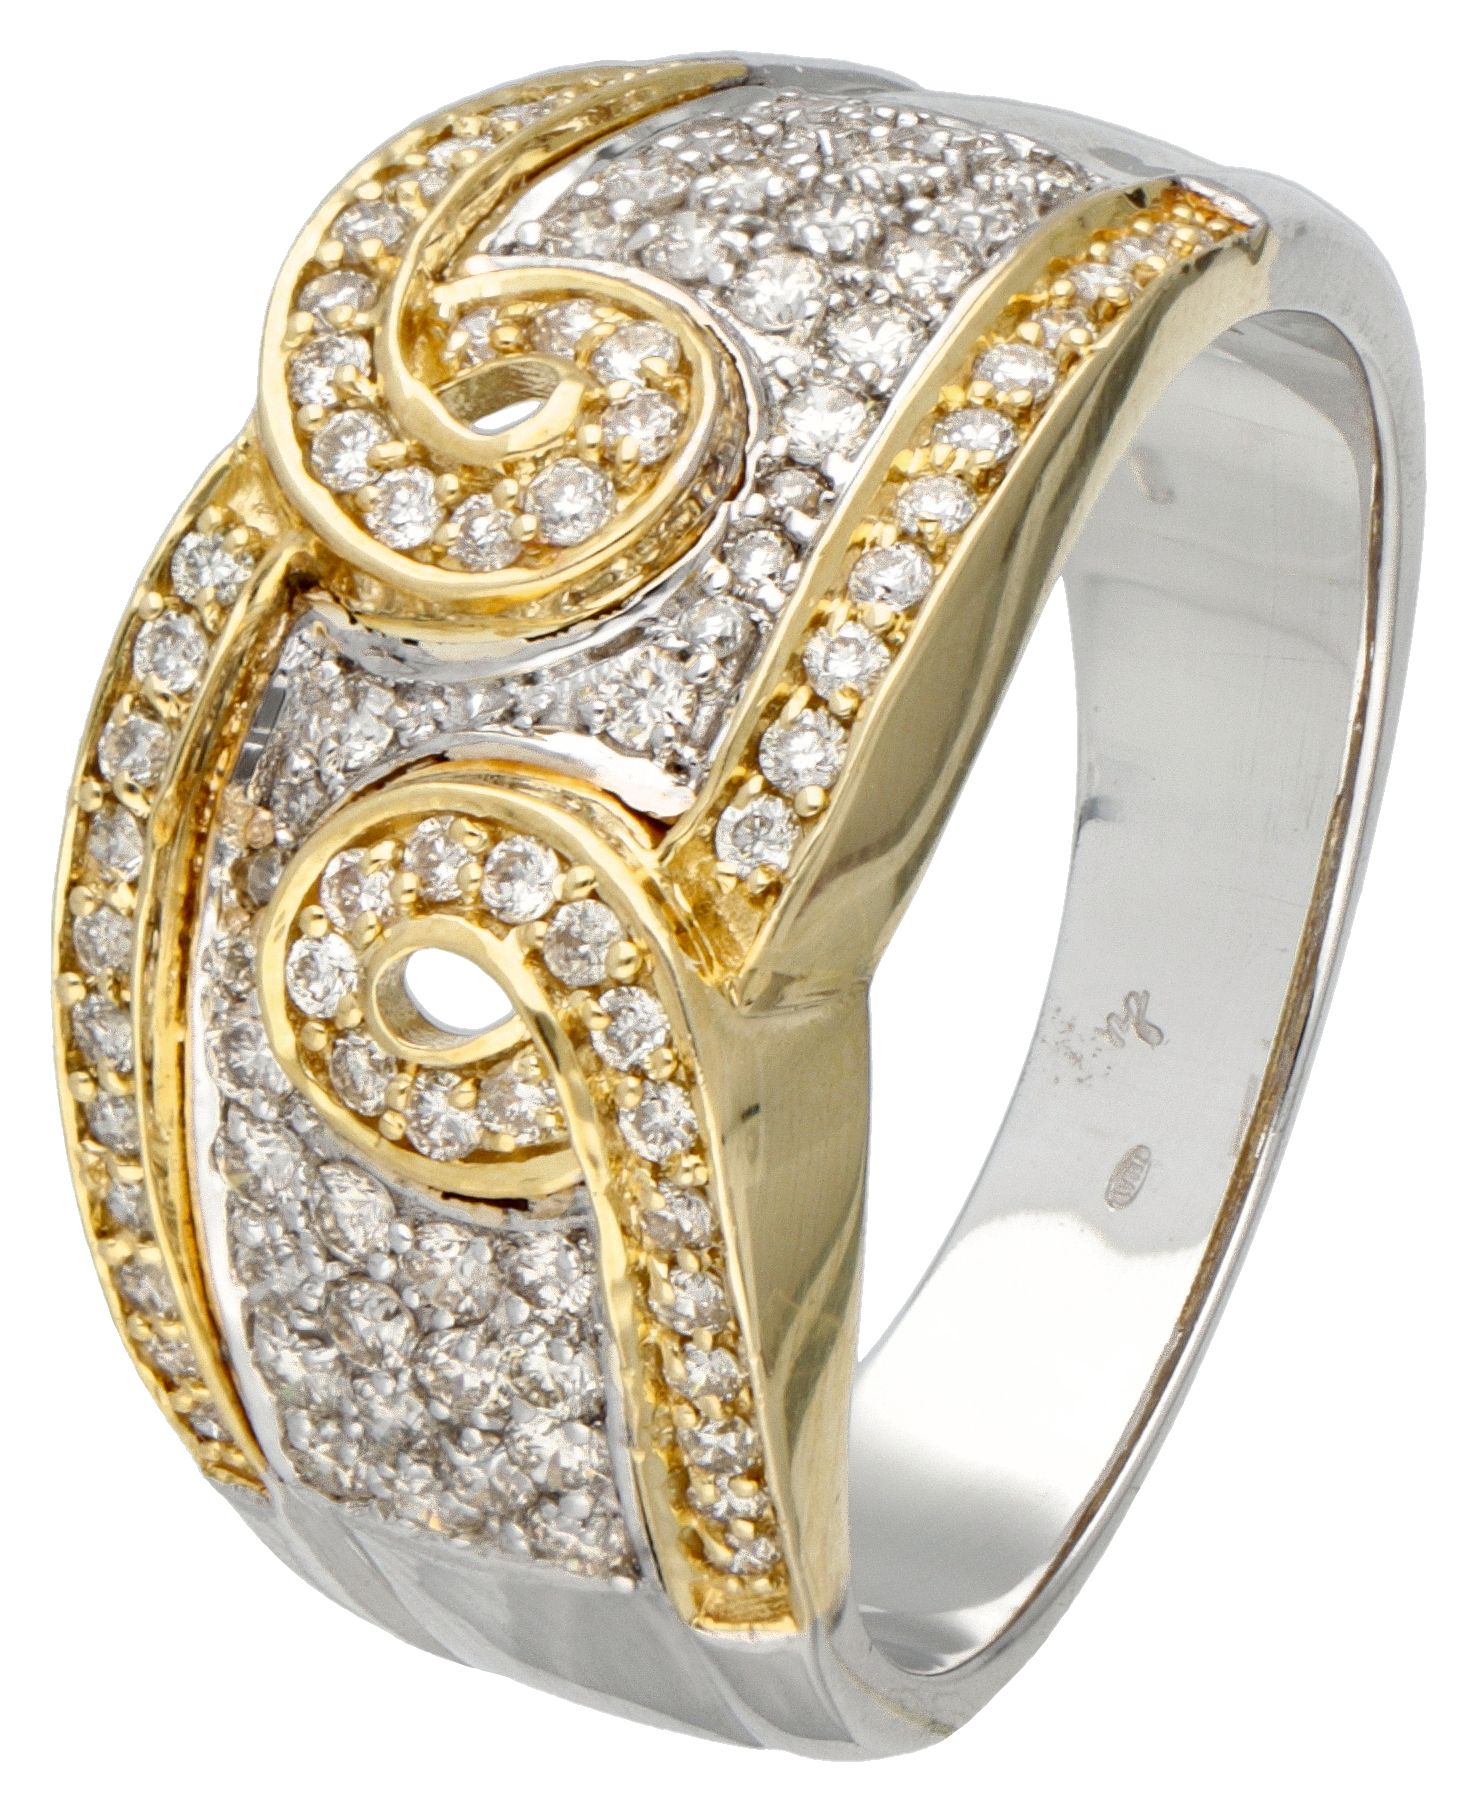 18K. Bicolor gold ring set with approx. 0.65 ct. Diamond. Hallmarks: 750, CP. Ma&hellip;